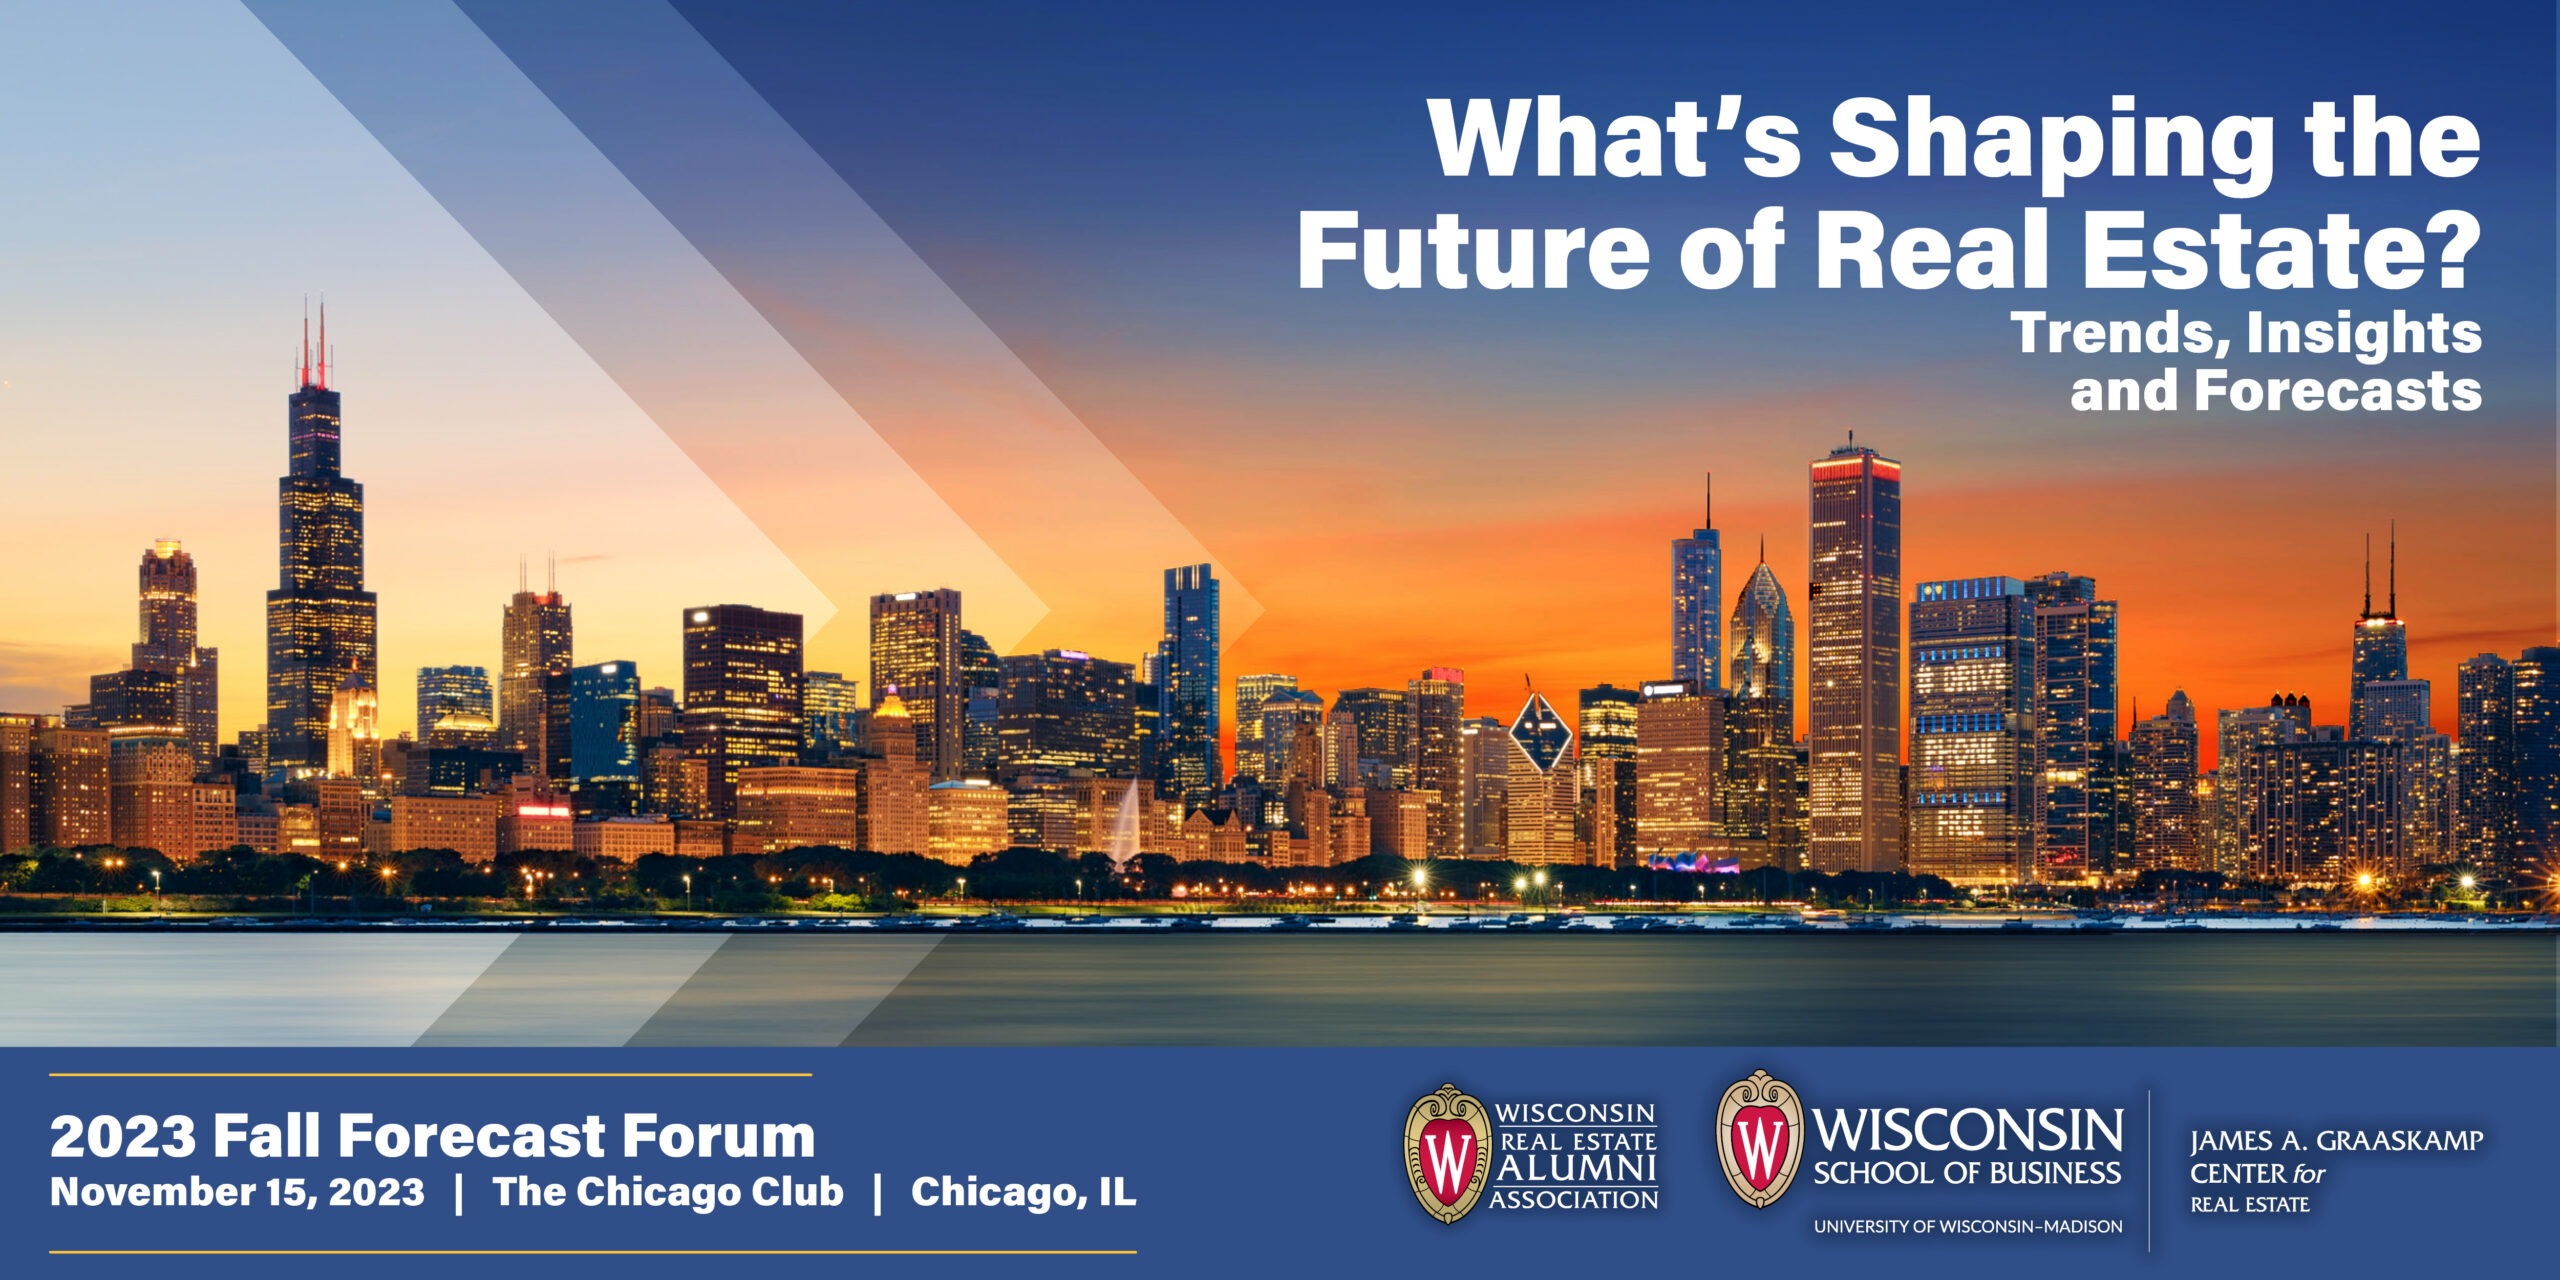 Chicago Skyline at Sunset; What's Shaping the Future of Real Estate? Trends, Insights and Forecasts